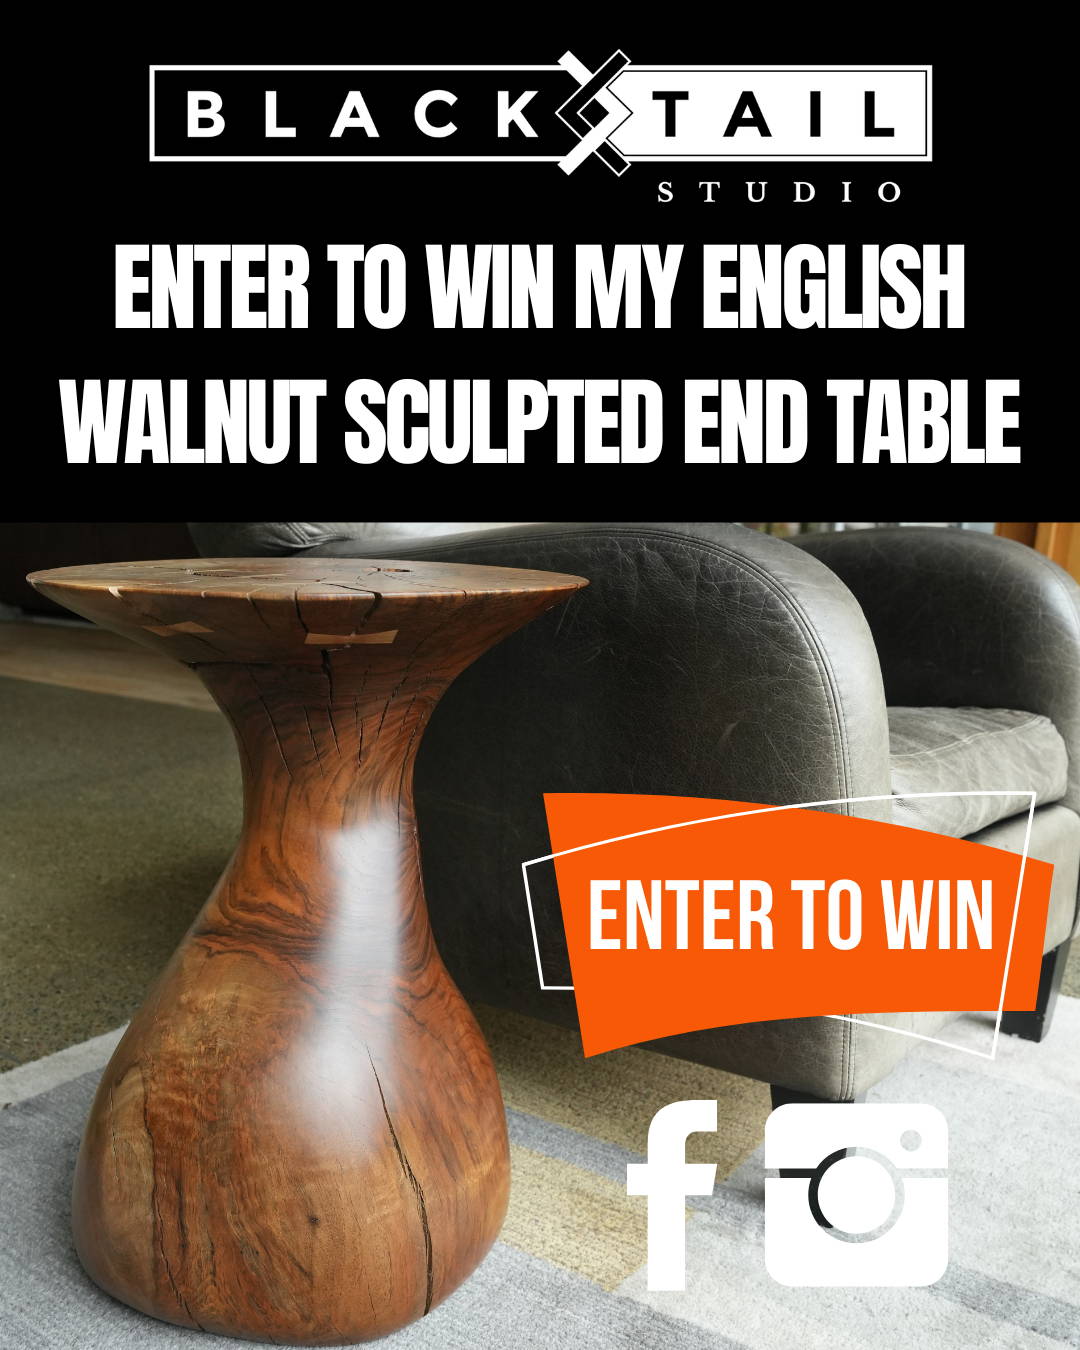 The Blacktail Studio End Table Giveaway